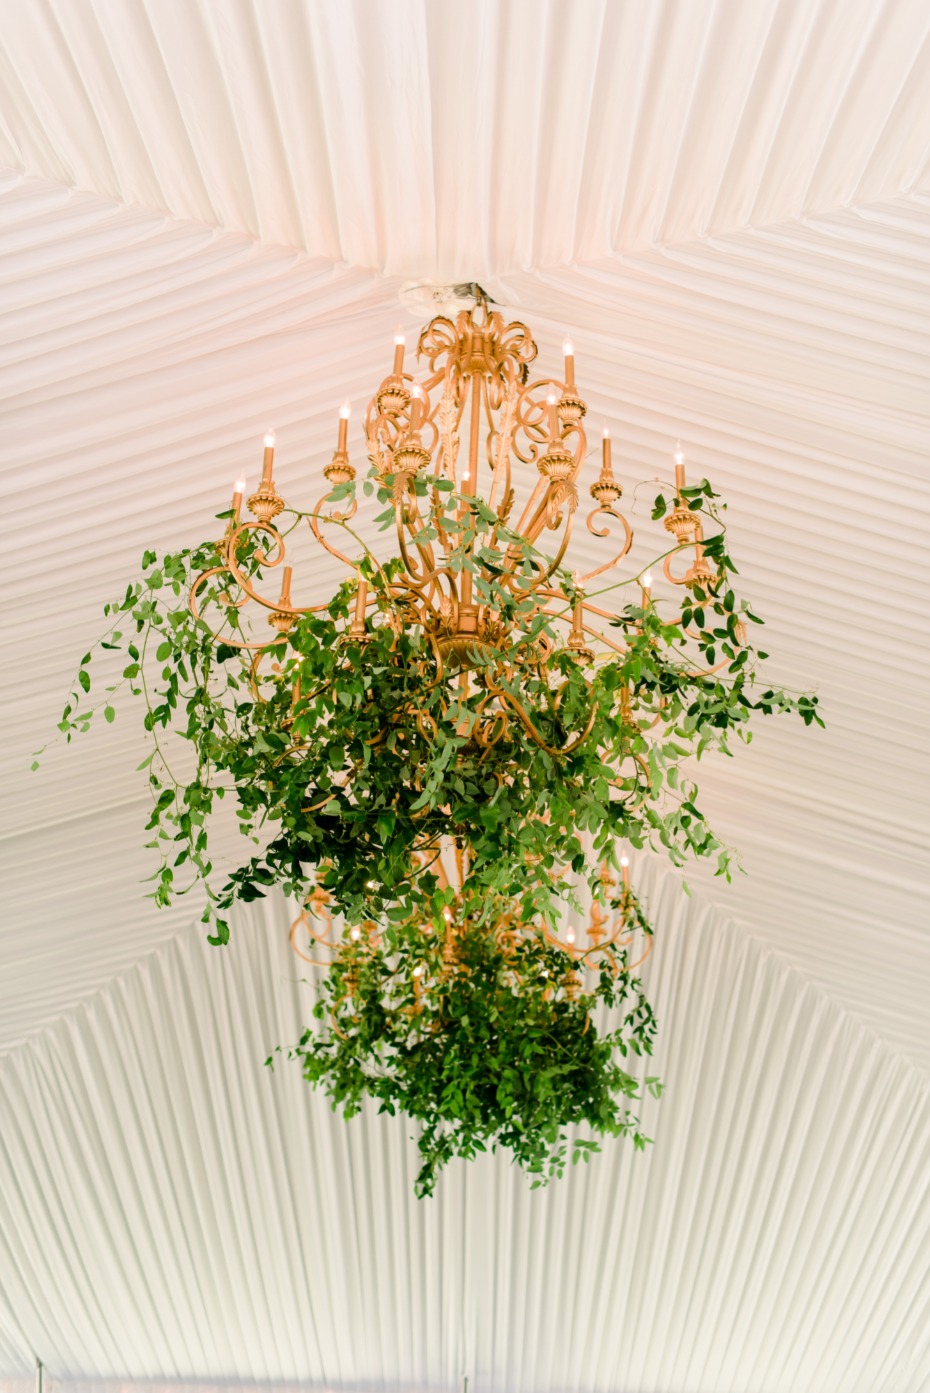 ivy accented wedding chandeliers in the center of the reception tent